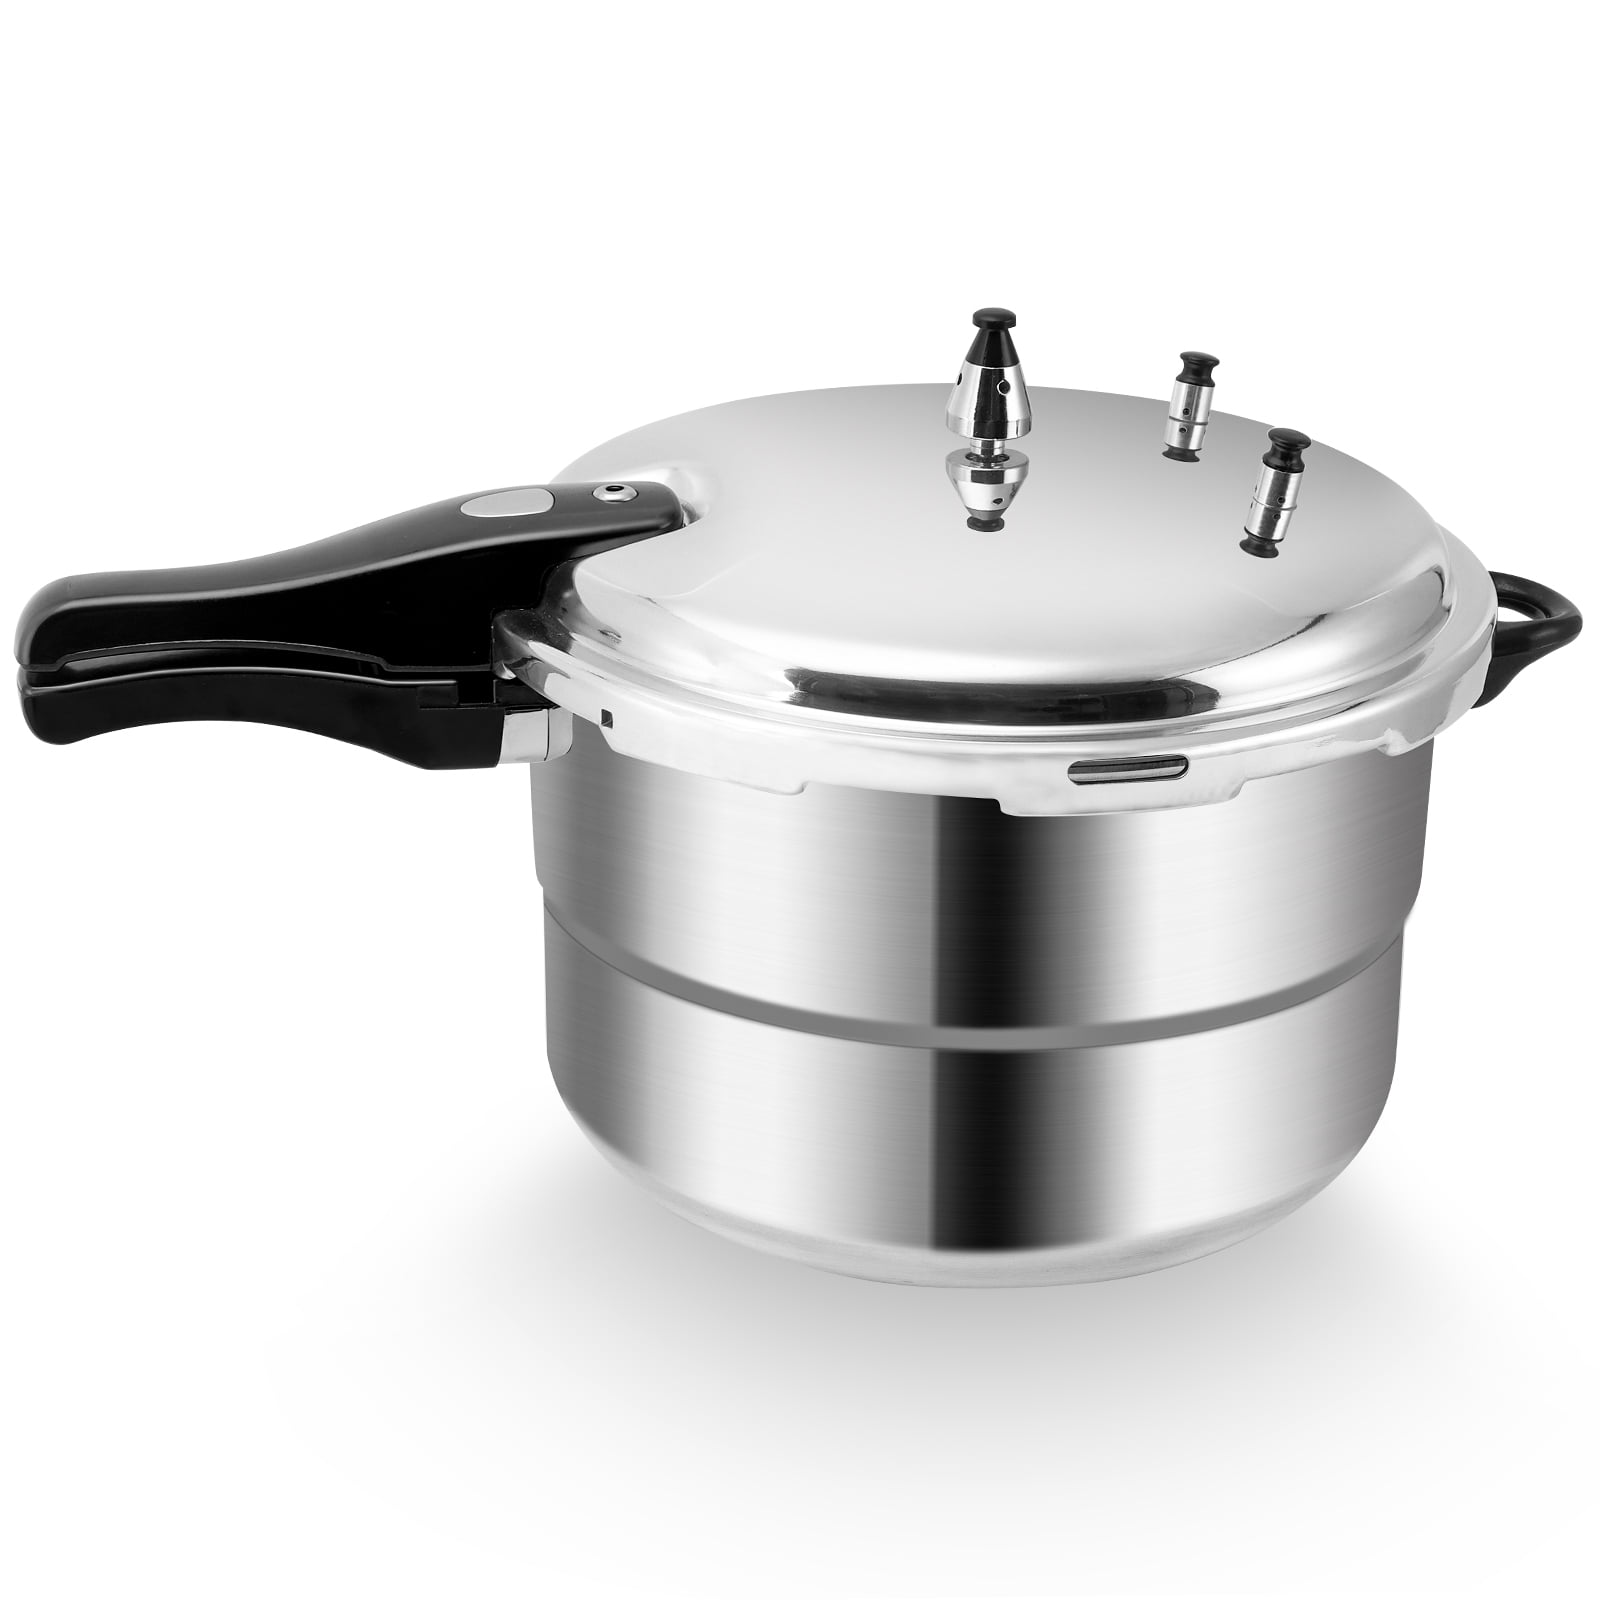 Secura Stainless Steel 6-quart Electric Pressure Cooker Steam Rack